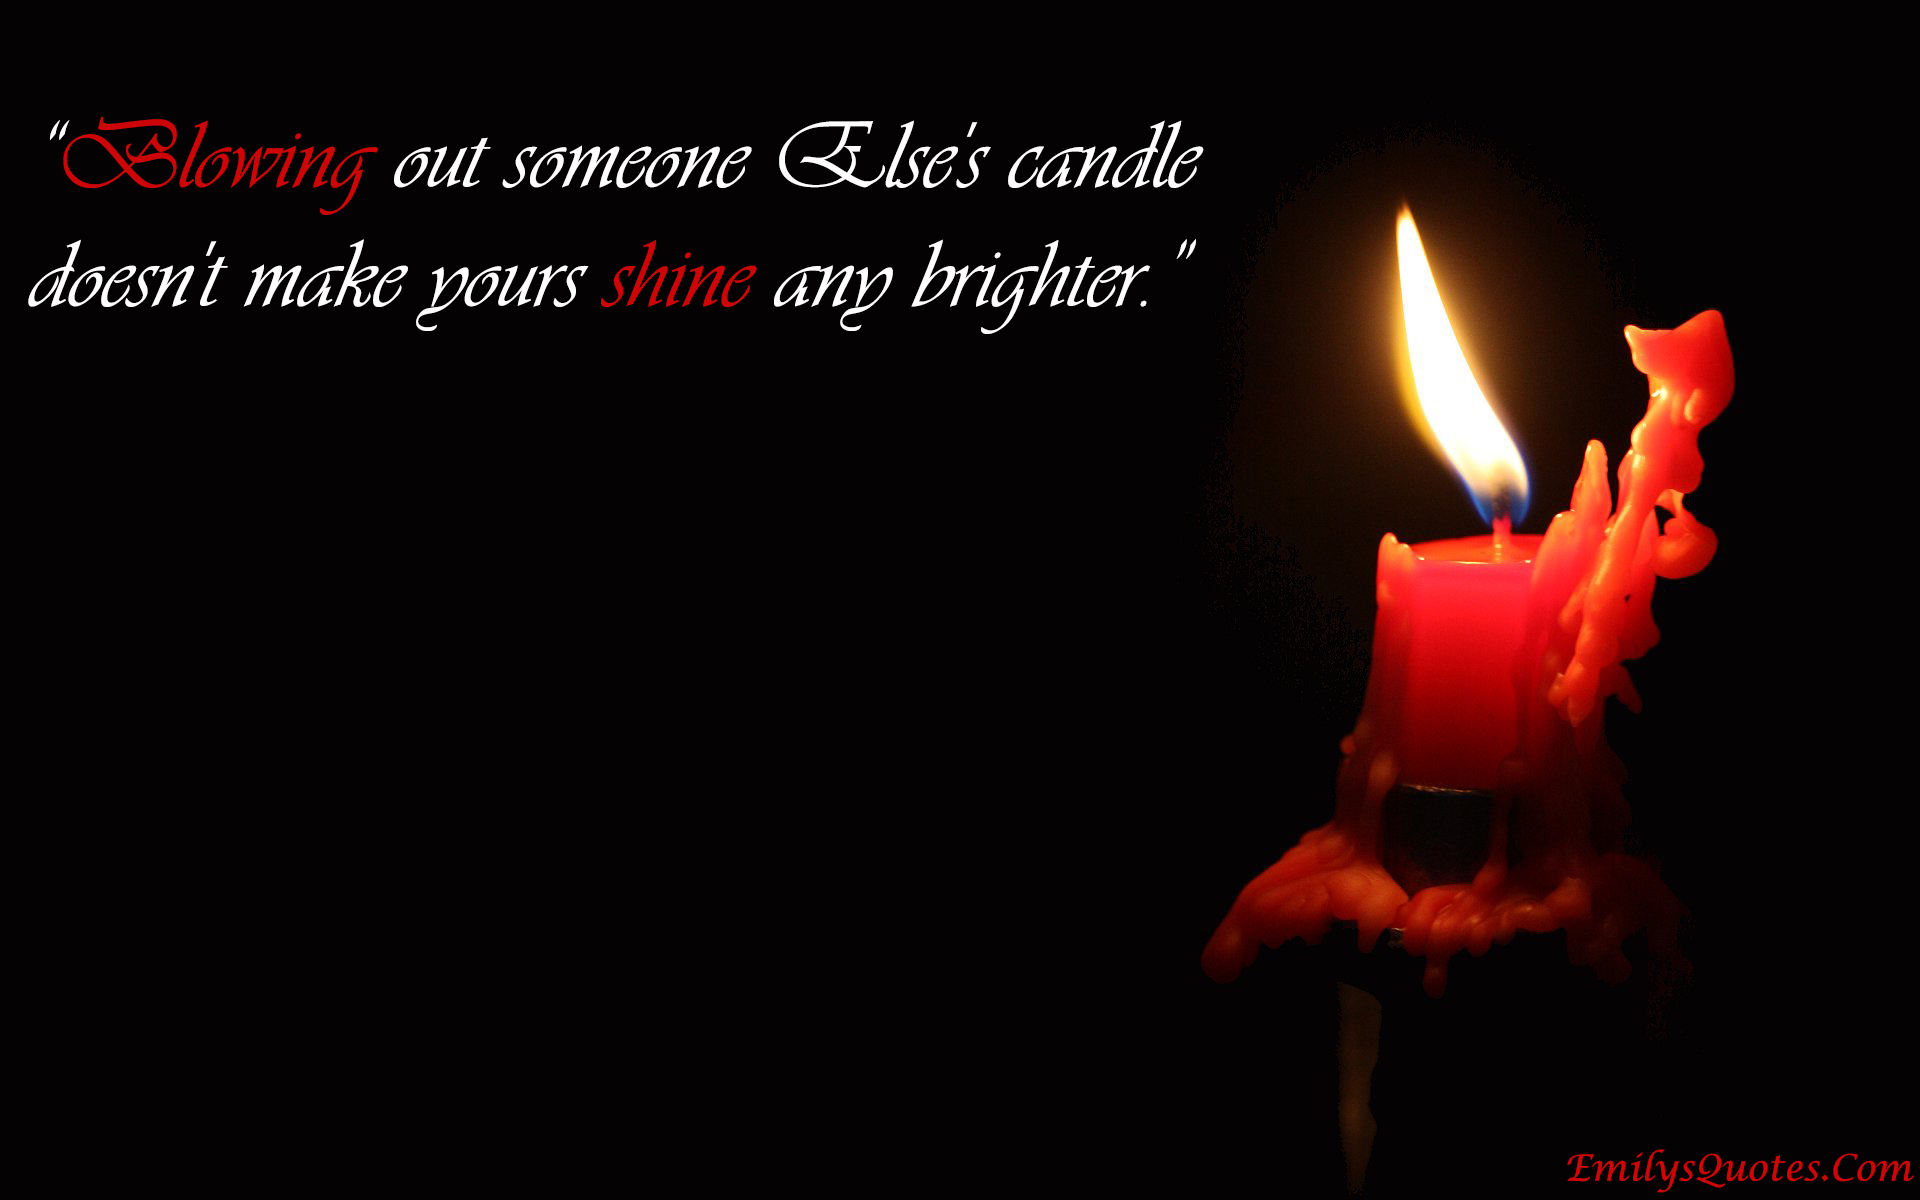 Blowing out someone Else’s candle doesn’t make yours shine any brighter